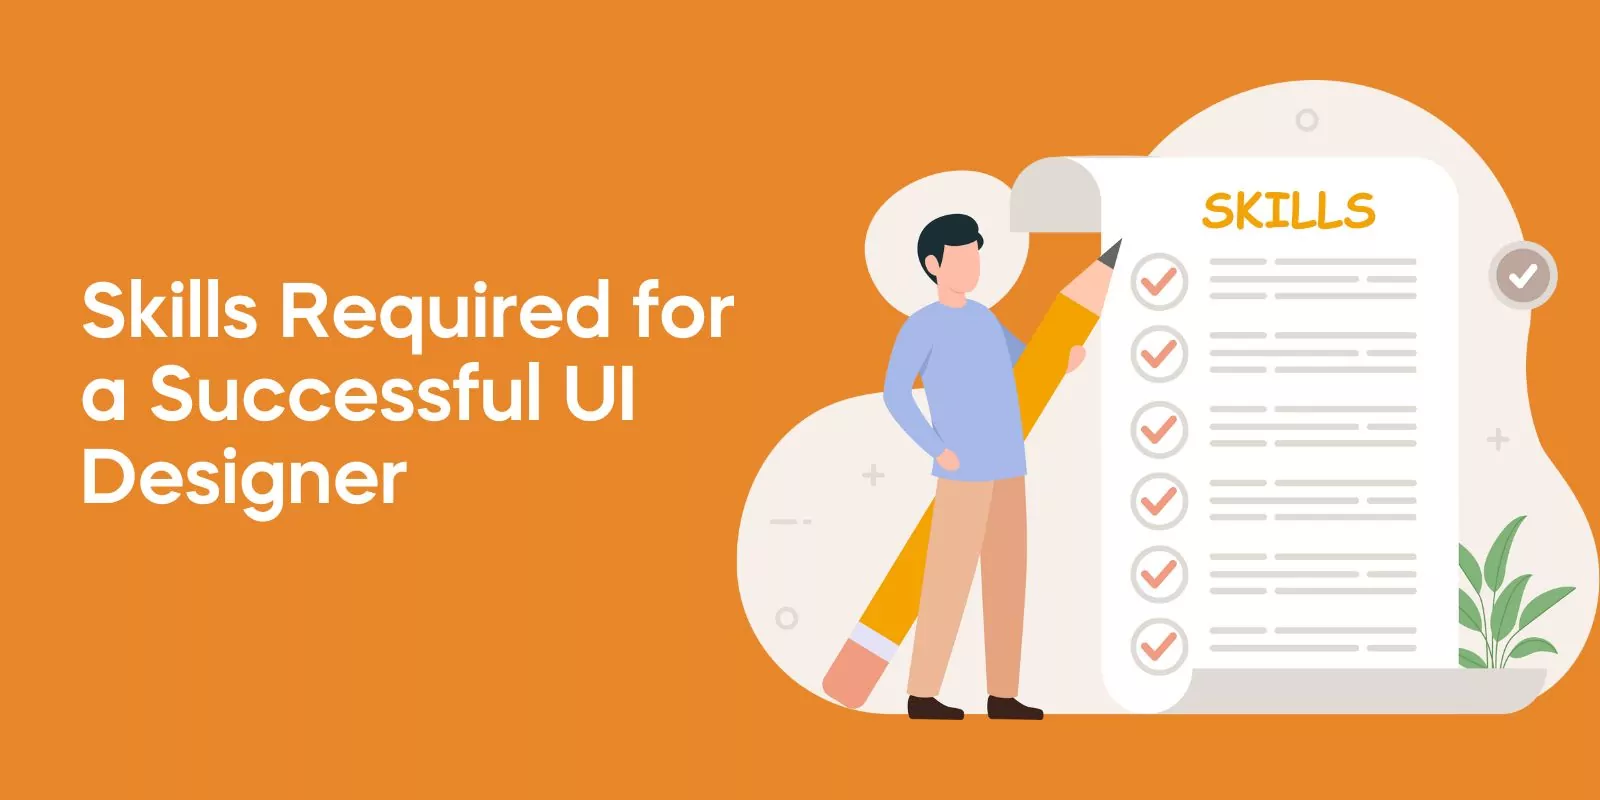 Skills Required for a Successful UI Designer